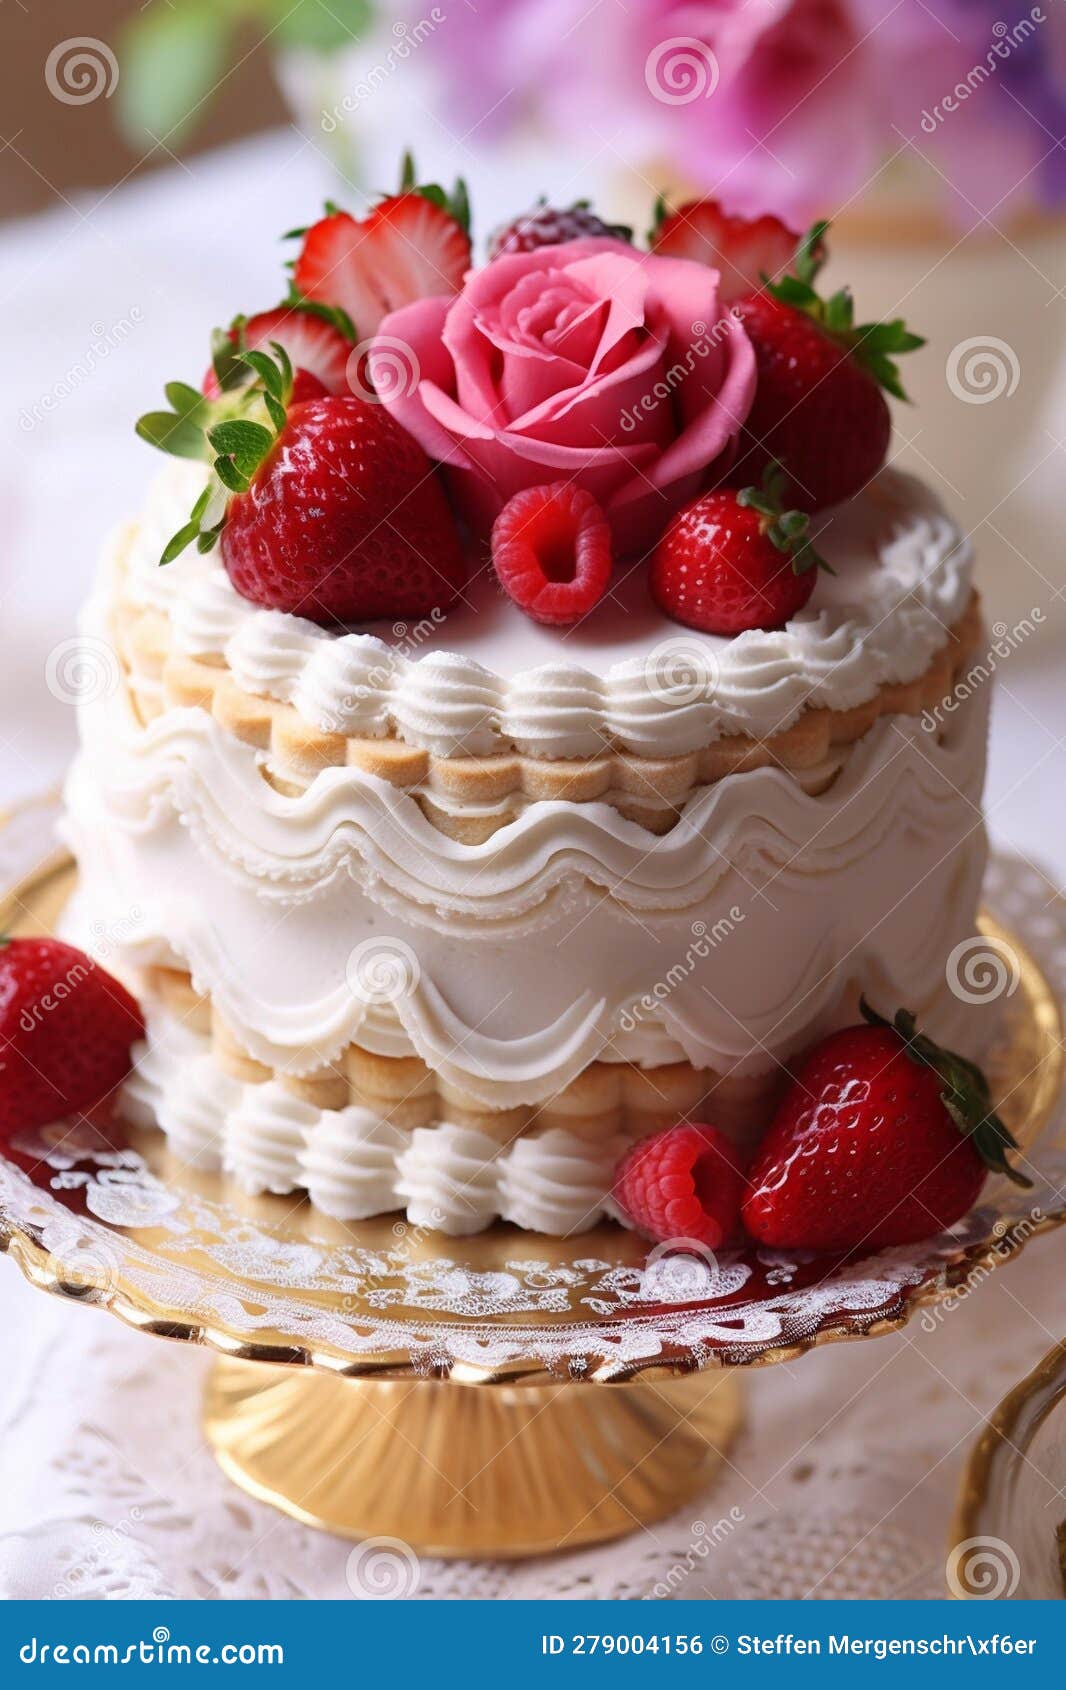 strawberry cream bridal cake with floral decorations